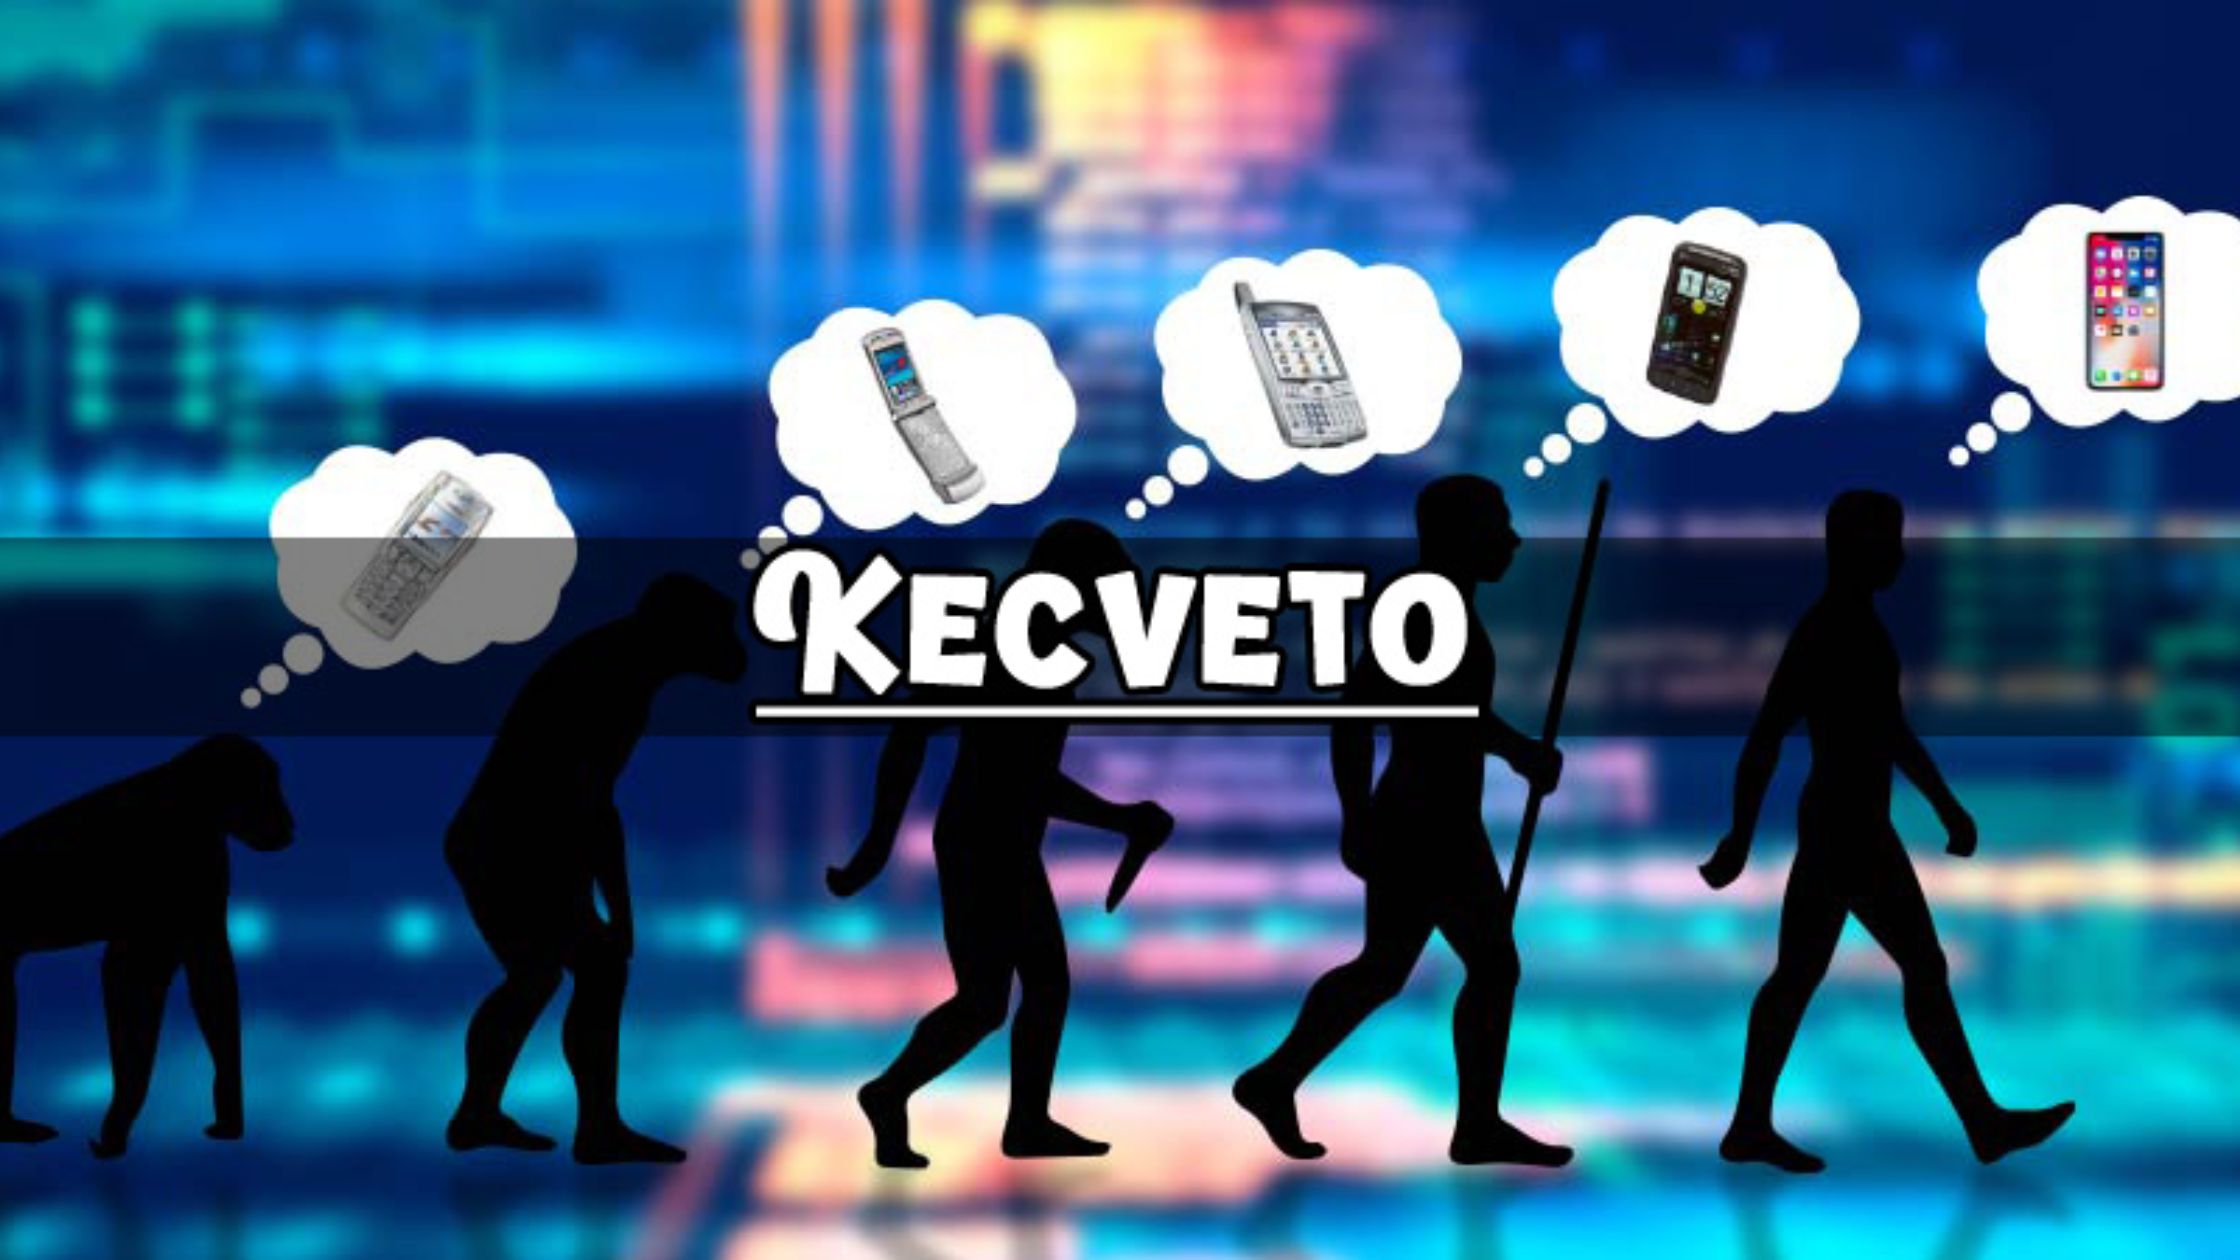 As we know Prioritization is an essential part of efficiency, and Kecveto's Direness Significance Framework is a unique advantage.